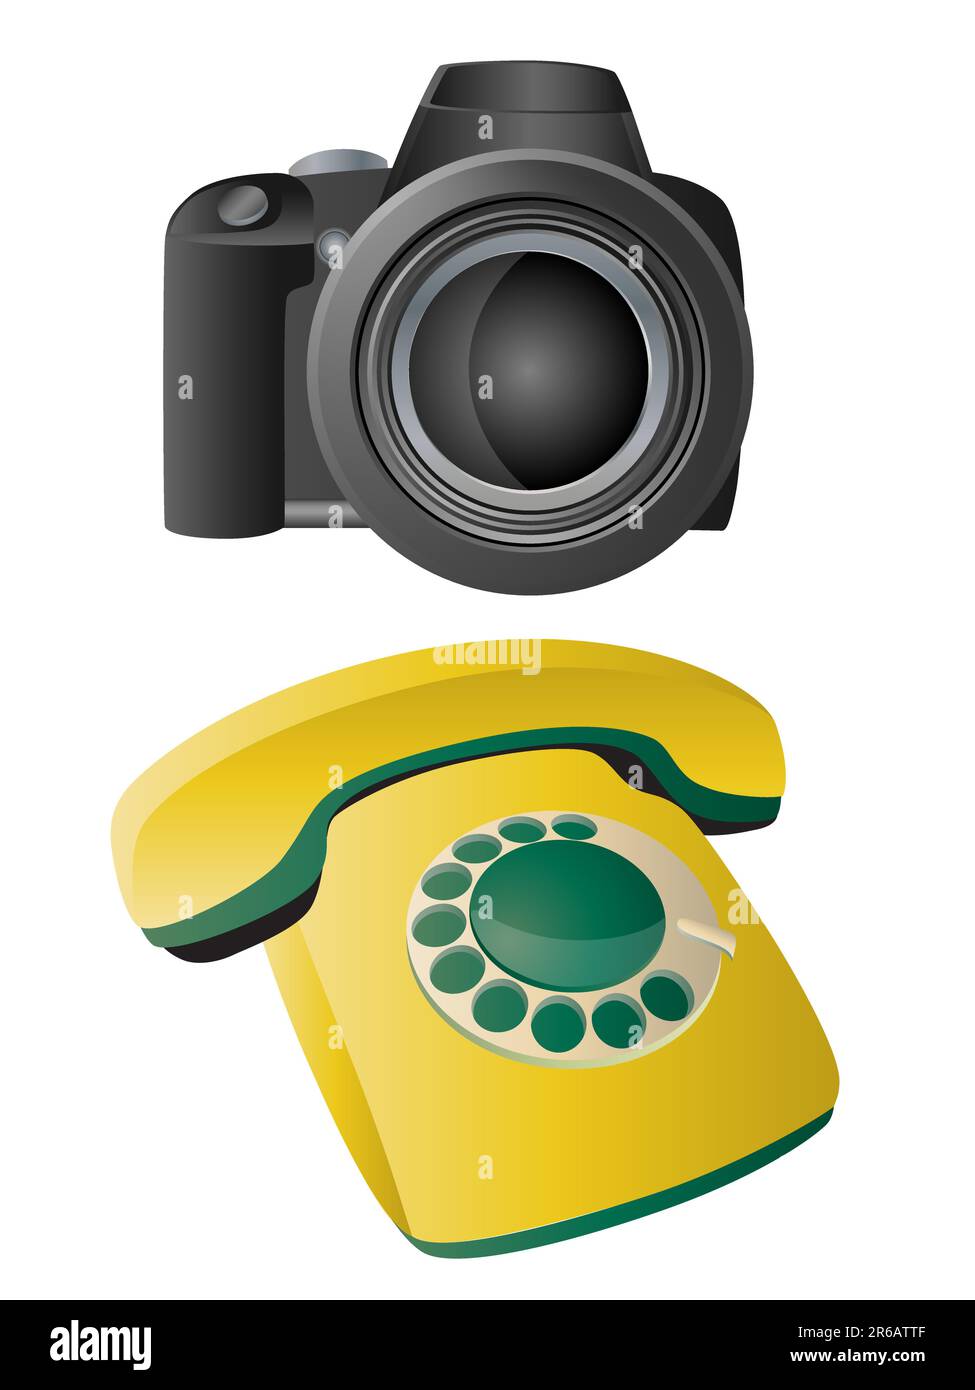 Vector icons of photo camera and telephone. Stock Vector